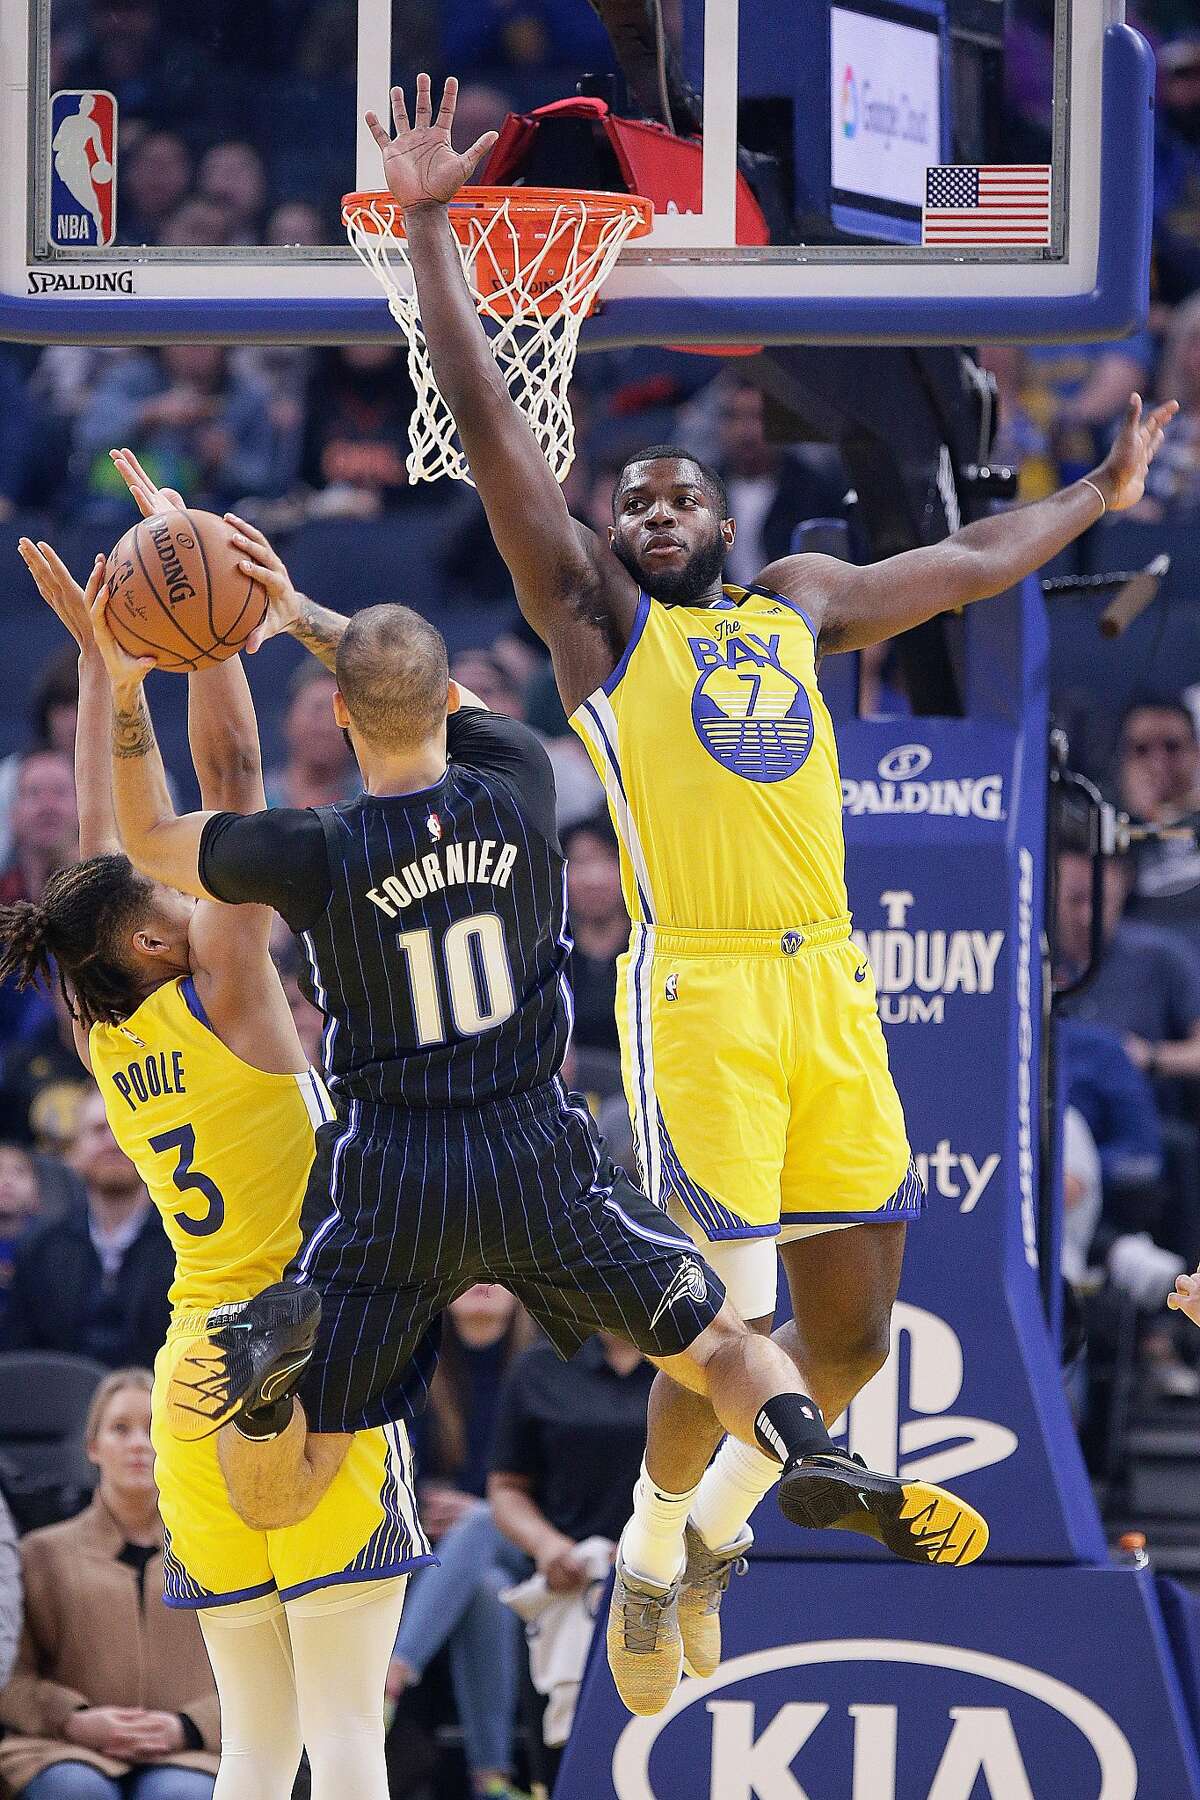 Golden State Warriors forward Eric Paschall (7) and Warriors guard Jordan Poole (3) defend Orlando Magic guard Evan Fournier (10) in the first half of an NBA game at Chase Center, Saturday, Jan. 18, 2020, in San Francisco, Calif.